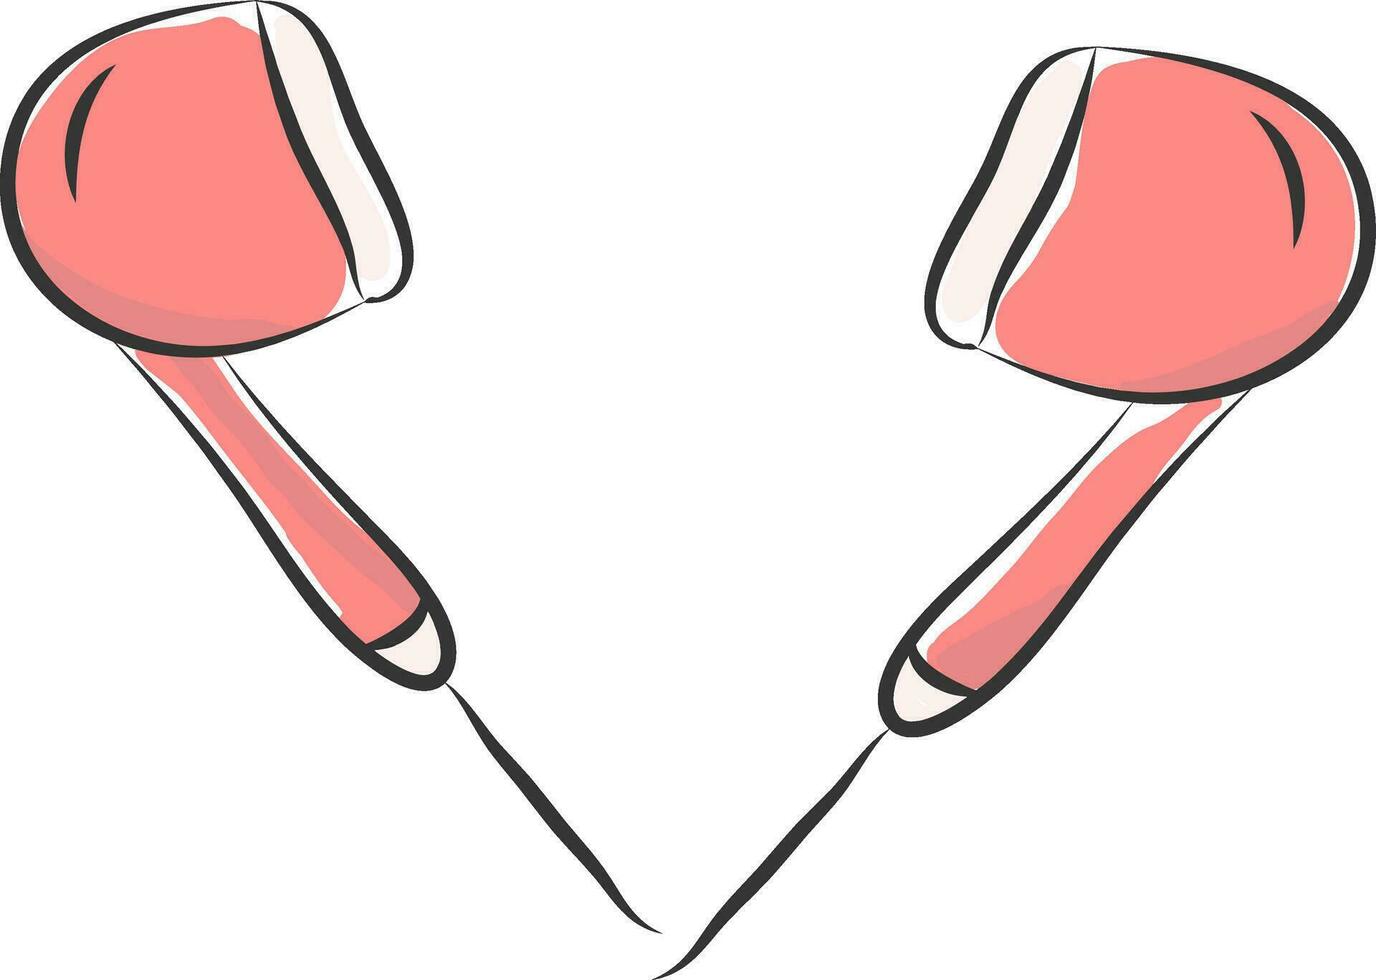 A pair of pink earphones vector or color illustration